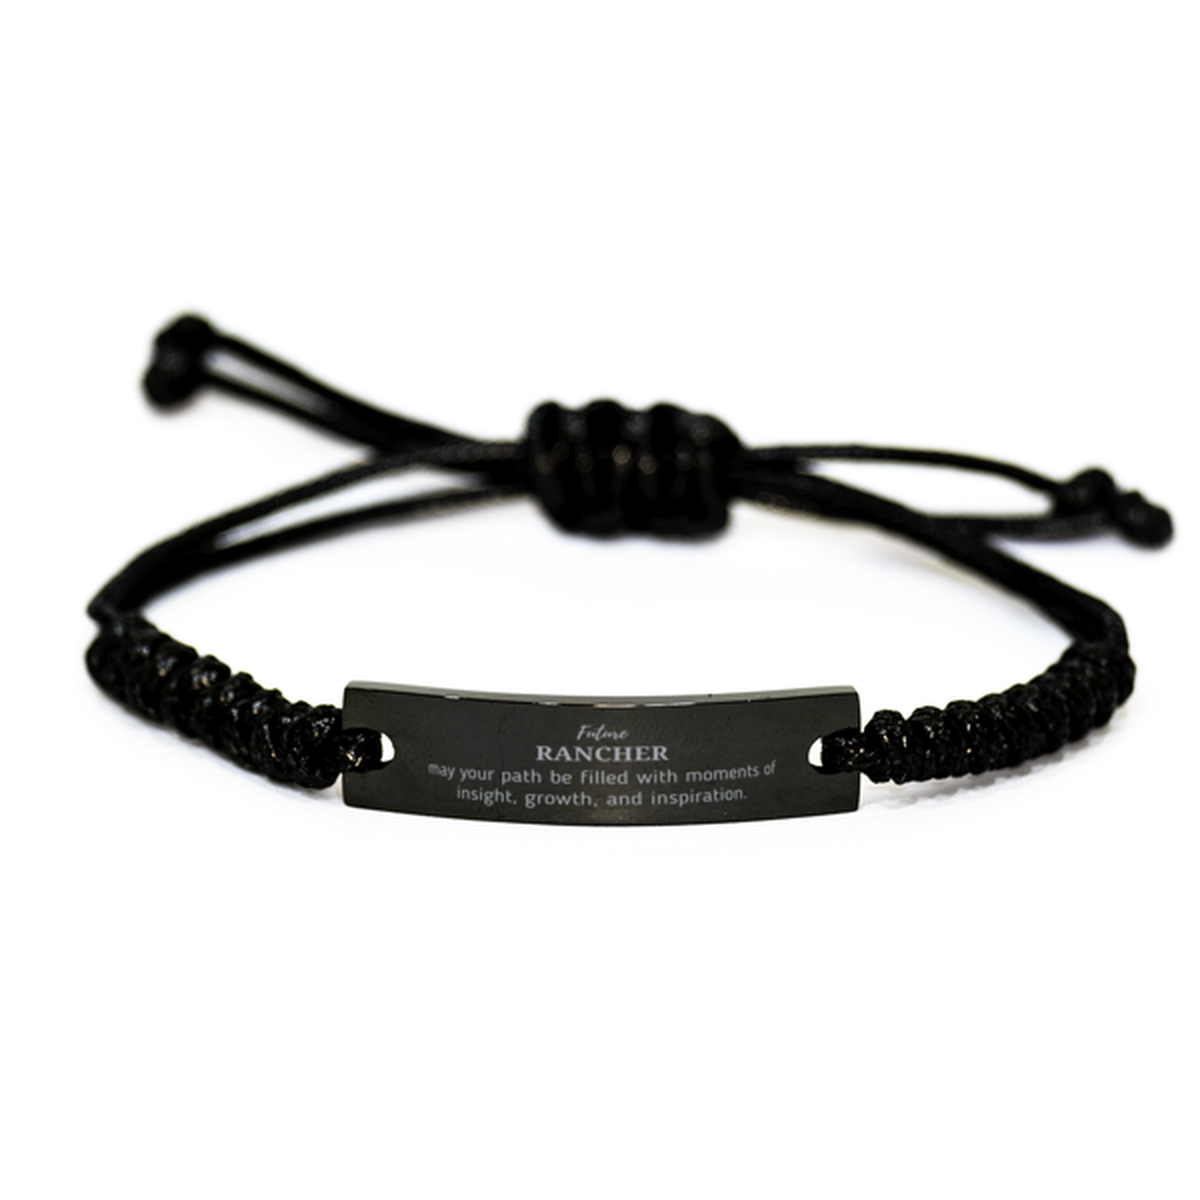 Future Rancher Gifts, May your path be filled with moments of insight, Graduation Gifts for New Rancher, Christmas Unique Black Rope Bracelet For Men, Women, Friends